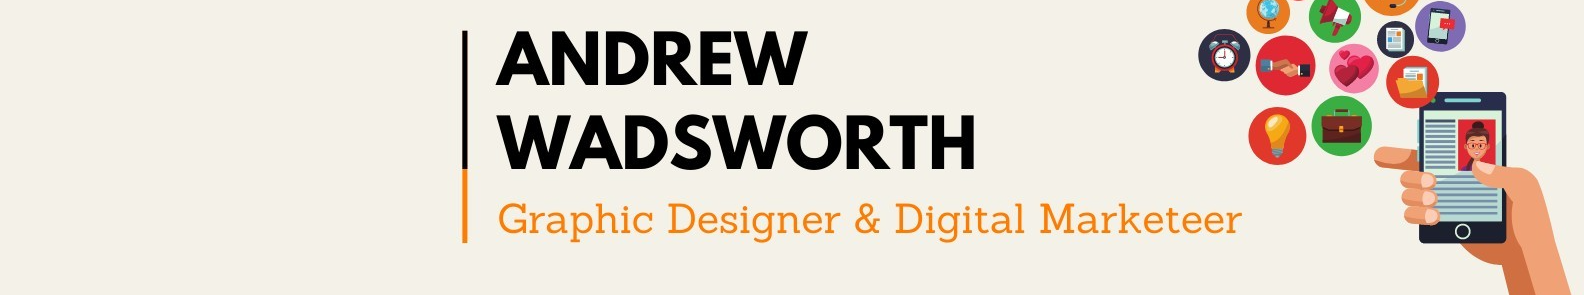 Andrew Wadsworth's profile banner